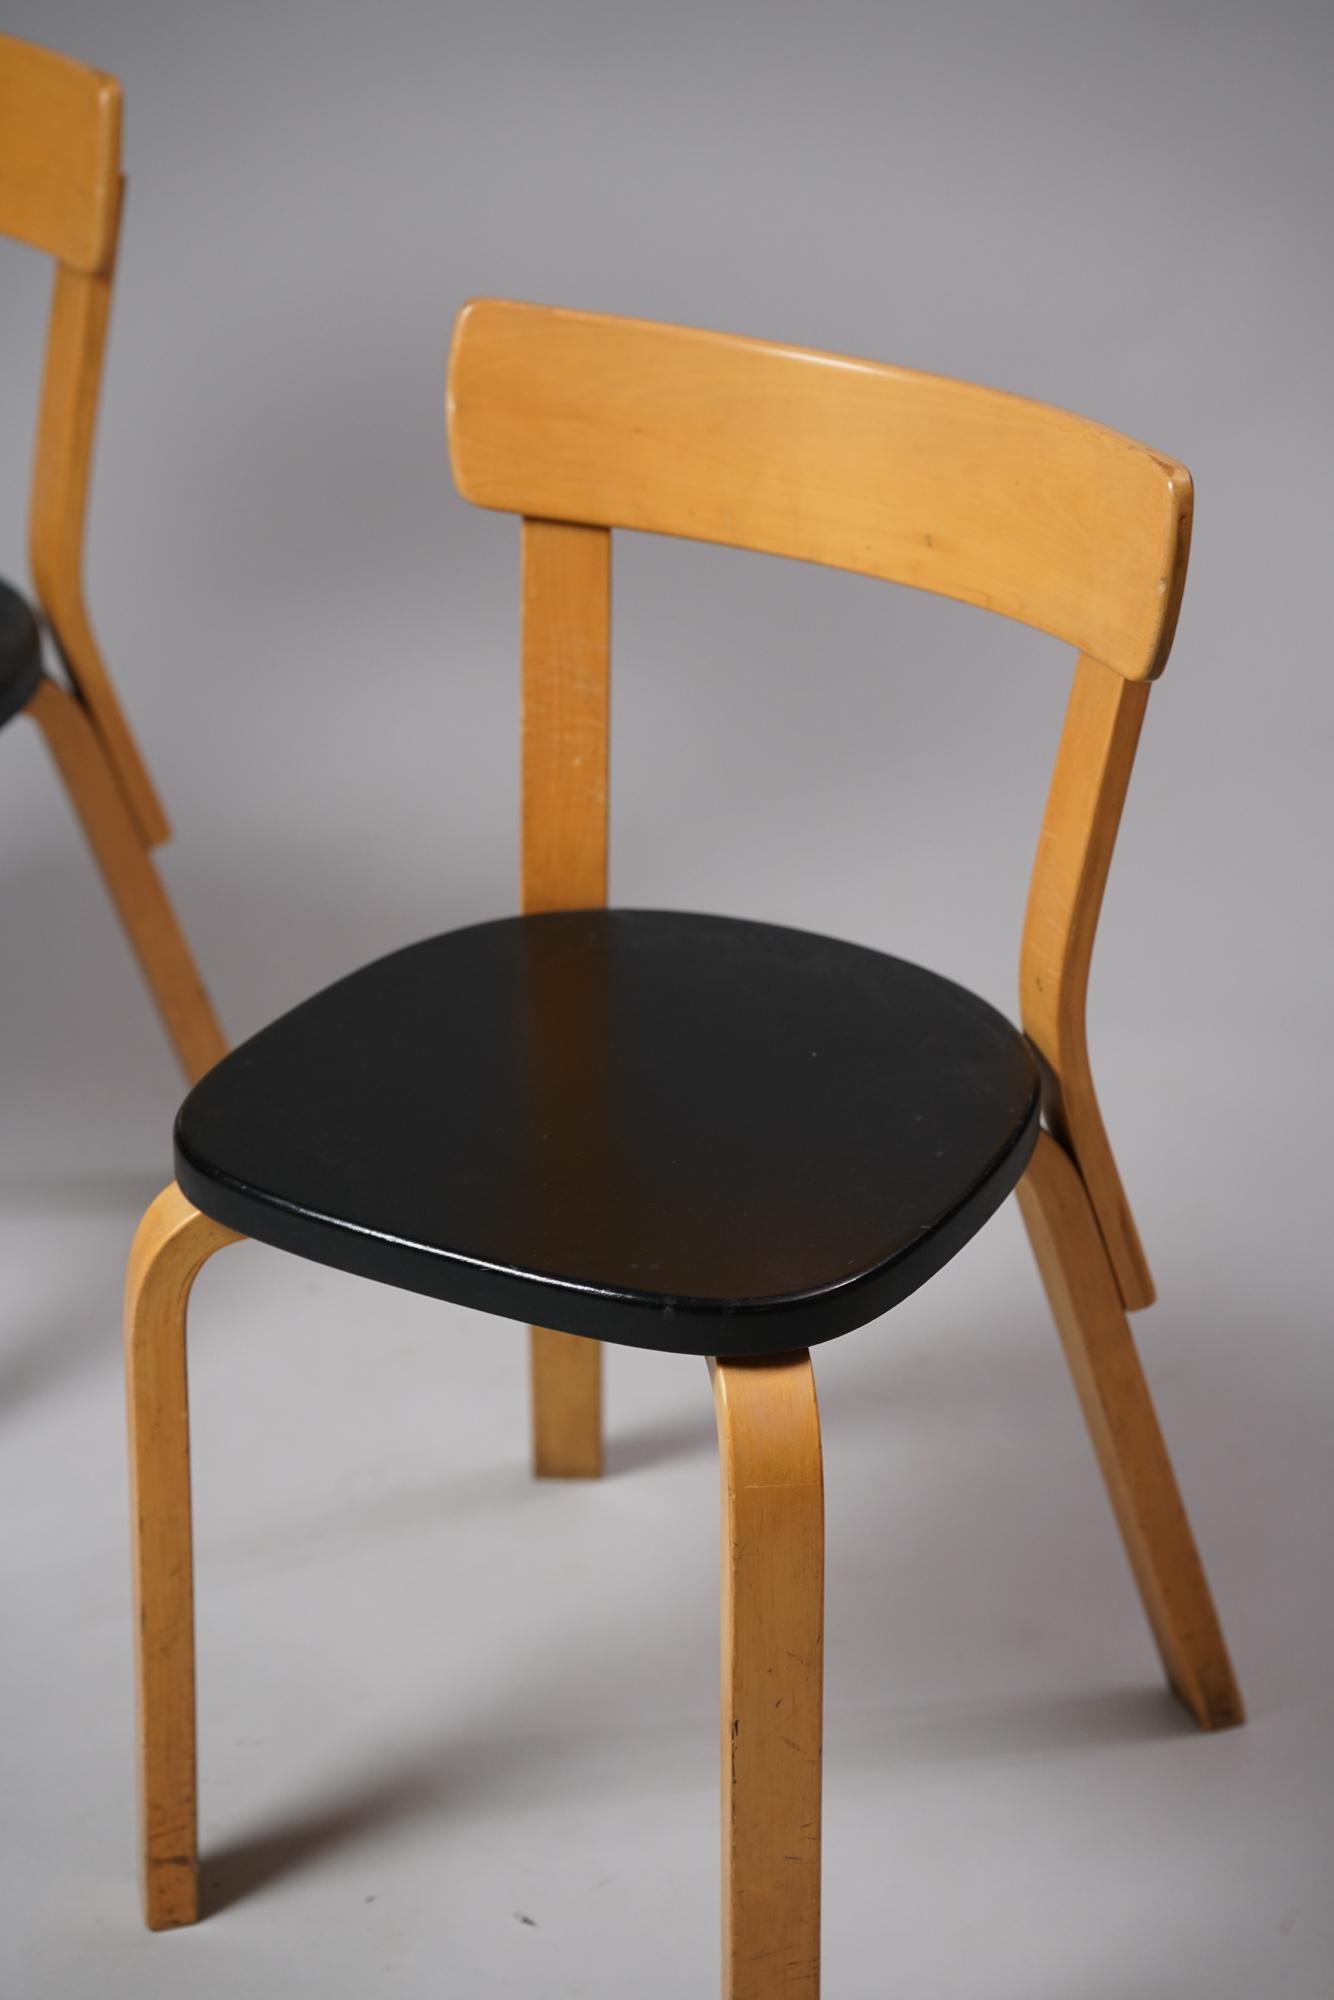 Pair of model 69 chairs by Alvar Aalto for Artek from the 1960s. Lacquered birch with imitation leather seats. Good vintage condition, patina and wear consistent with age and use. Iconic Alvar Aalto design. Suitable for dining chairs as well as desk